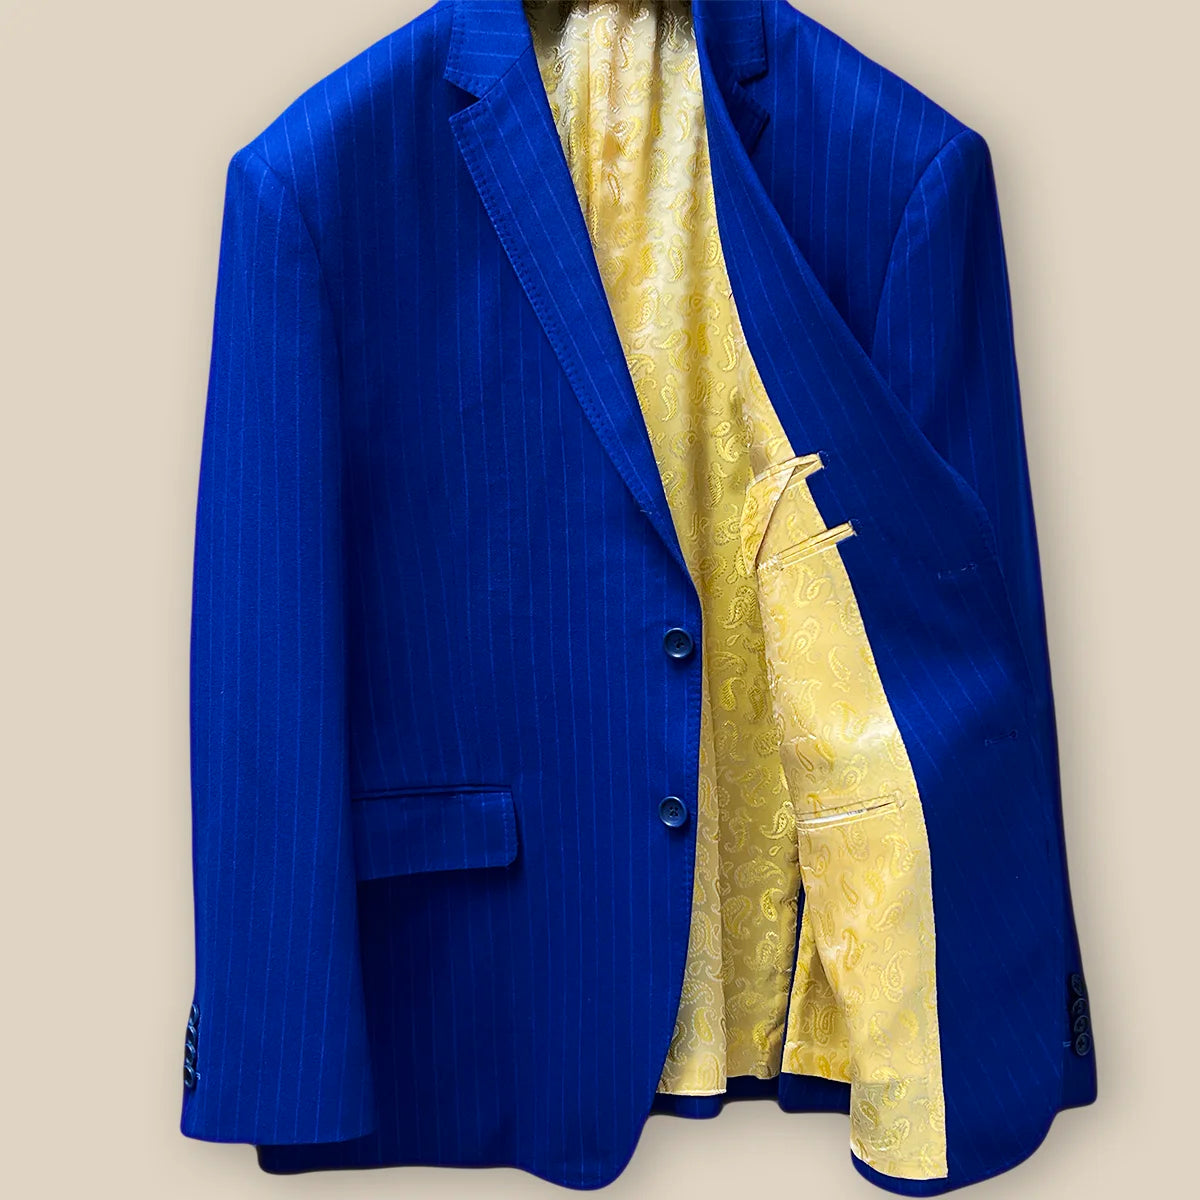 Inside left view of the royal blue pinstripe jacket.